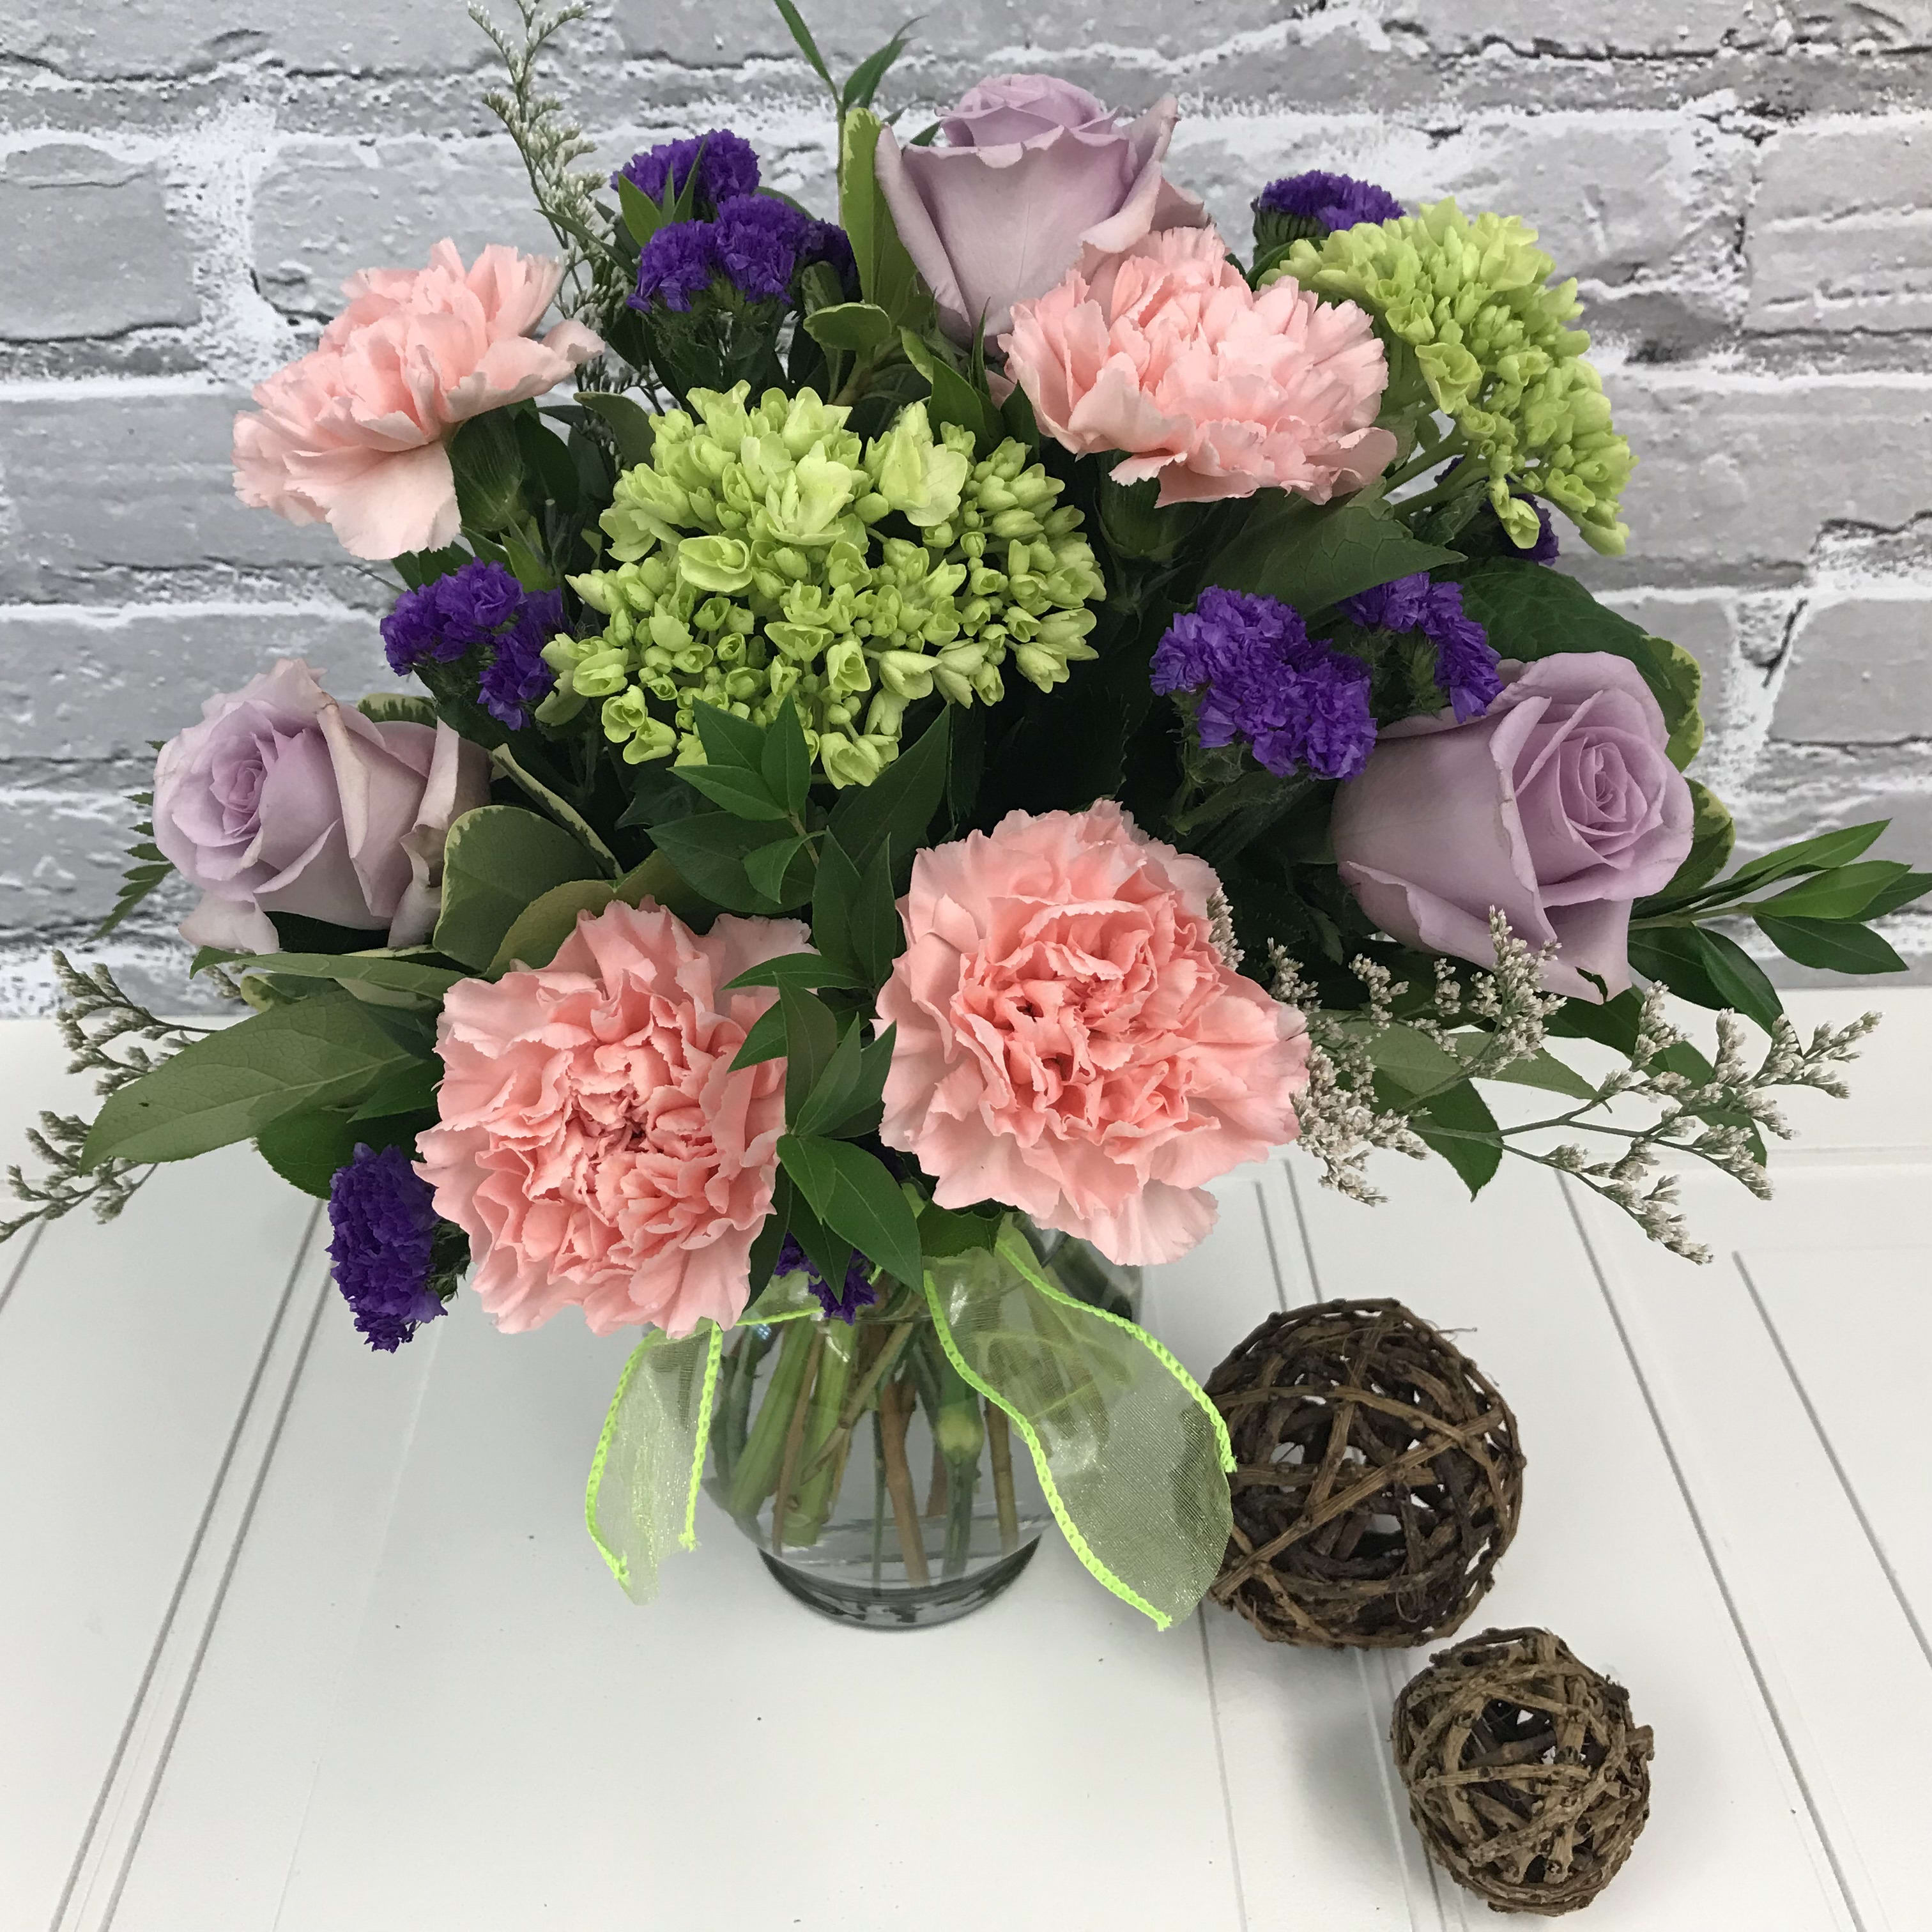 Perfect Pastels - Stunning lavender roses are combined with lush mini green hydrangeas and pink carnations to make this design pop! Who wouldn't love this bouquet? Perfect for any occasion.